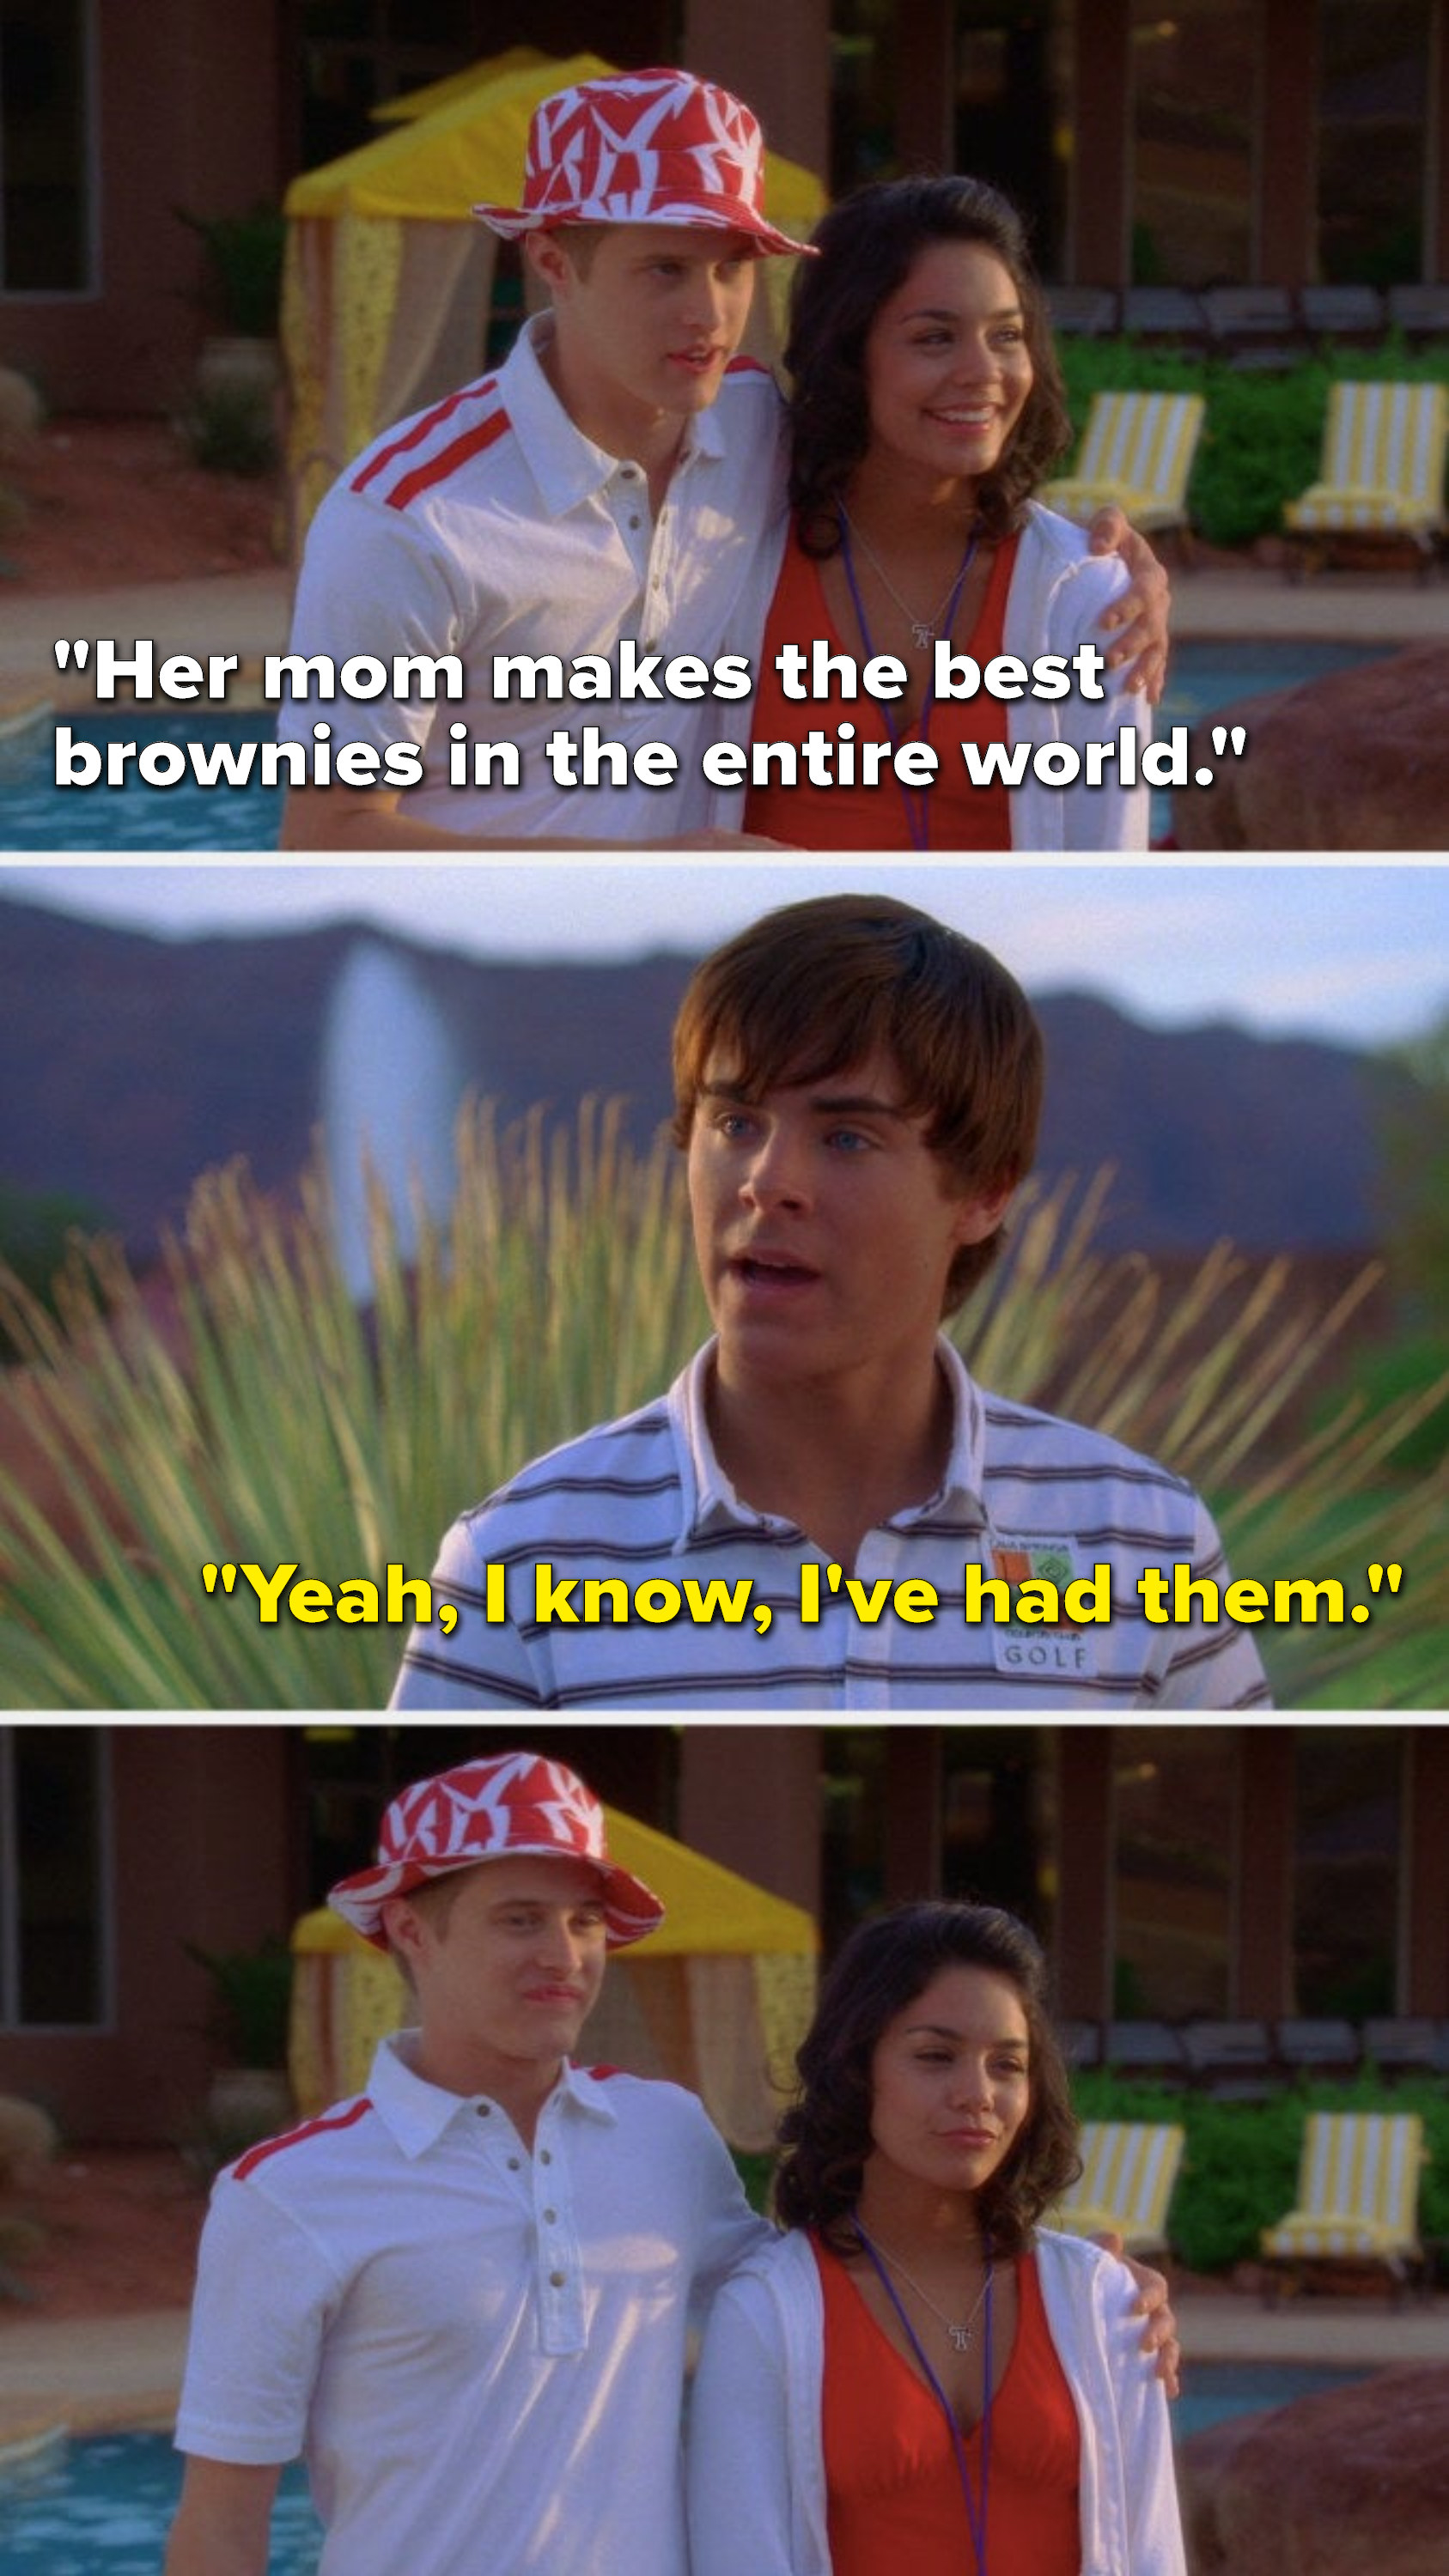 Ryan says, &quot;Her mom makes the best brownies in the entire world,&quot; and Troy says, &quot;Yeah, I know, I&#x27;ve had them&quot;